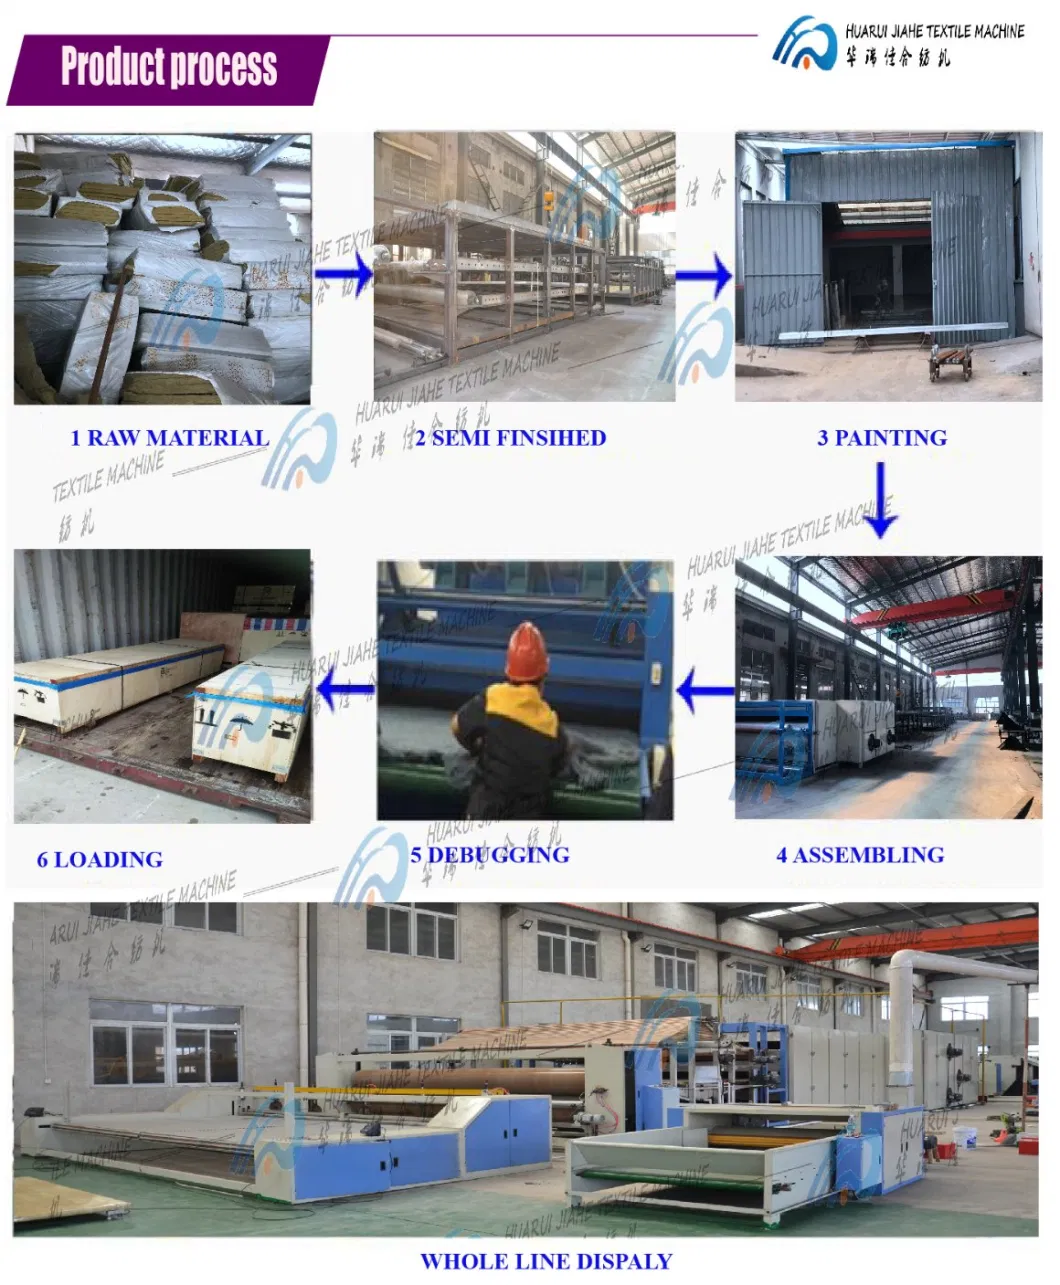 2020 Hot Yarn Dyeing and Wash Machine From Dyeing Machine Cone Sectional Dyeing Machine Fishing Net Yarn Dyeing Machine